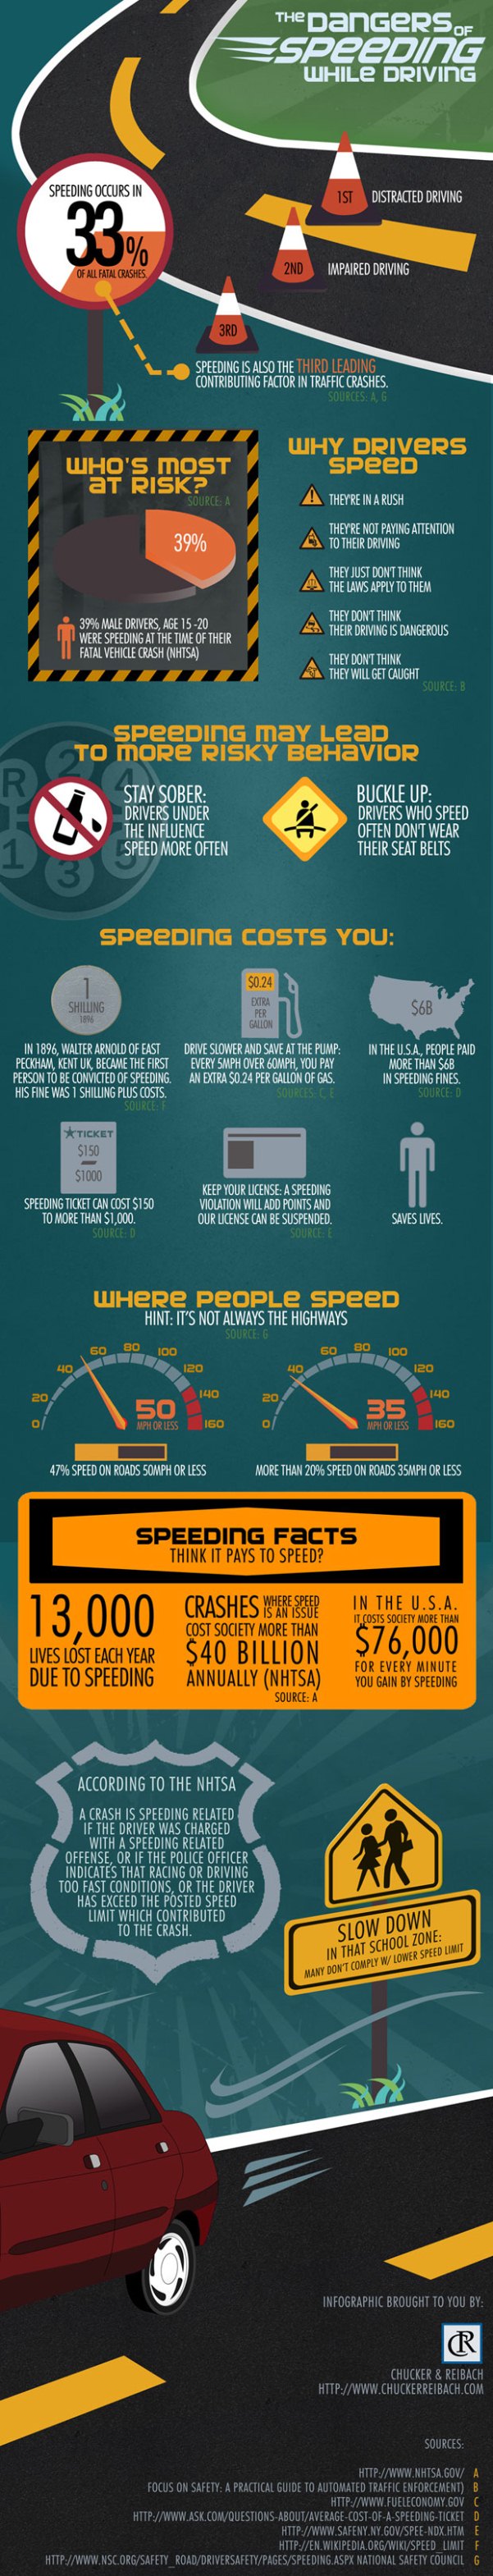 The Dangers Of Speeding While Driving (Infographic)